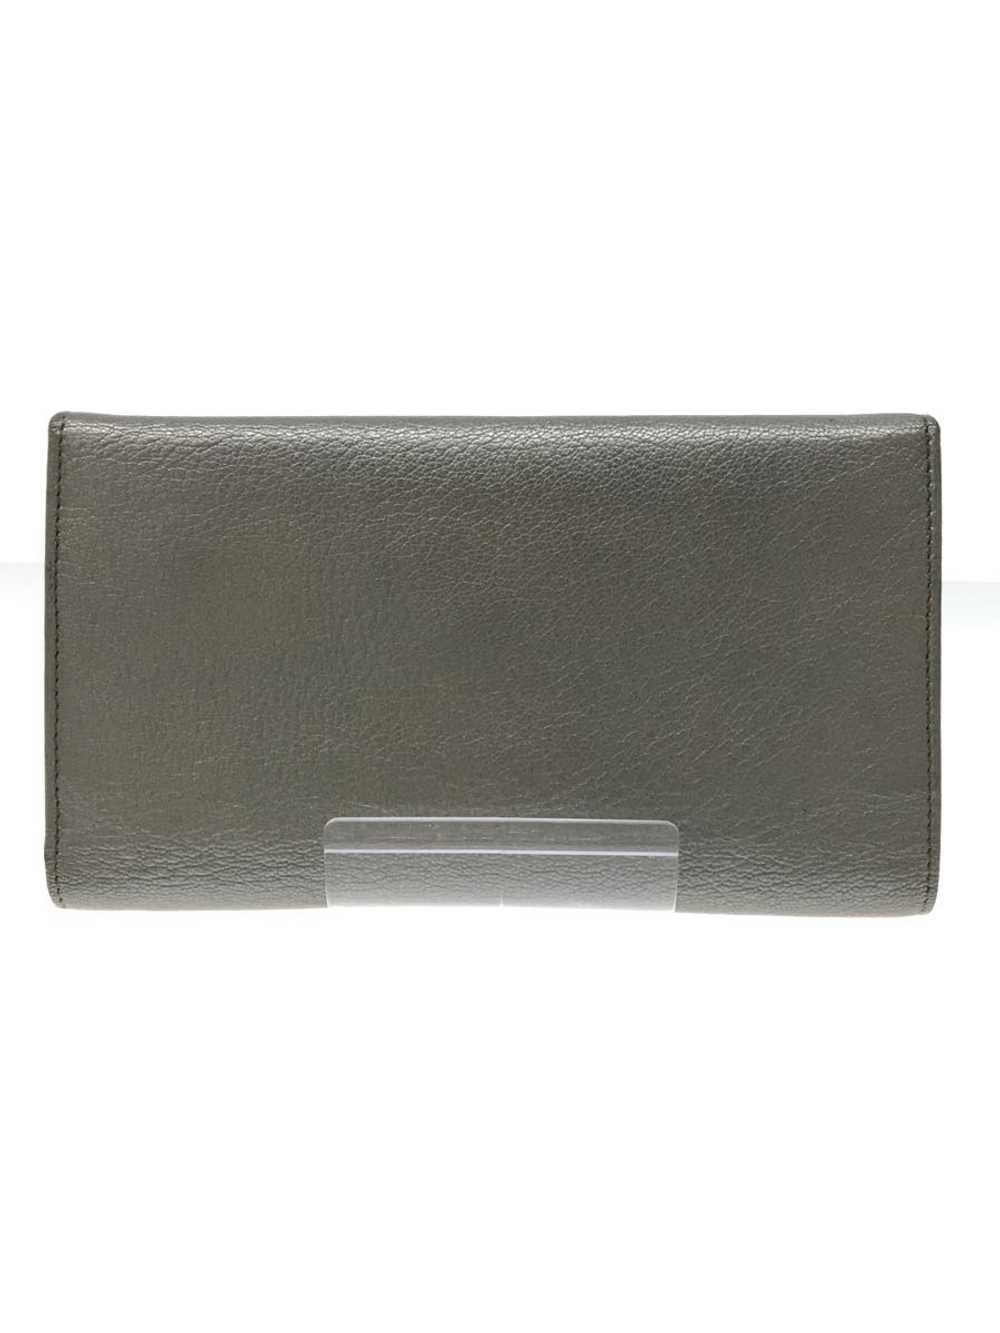 [Used in Japoan Wallet] Used Chanel Coco Mark/Tri… - image 2